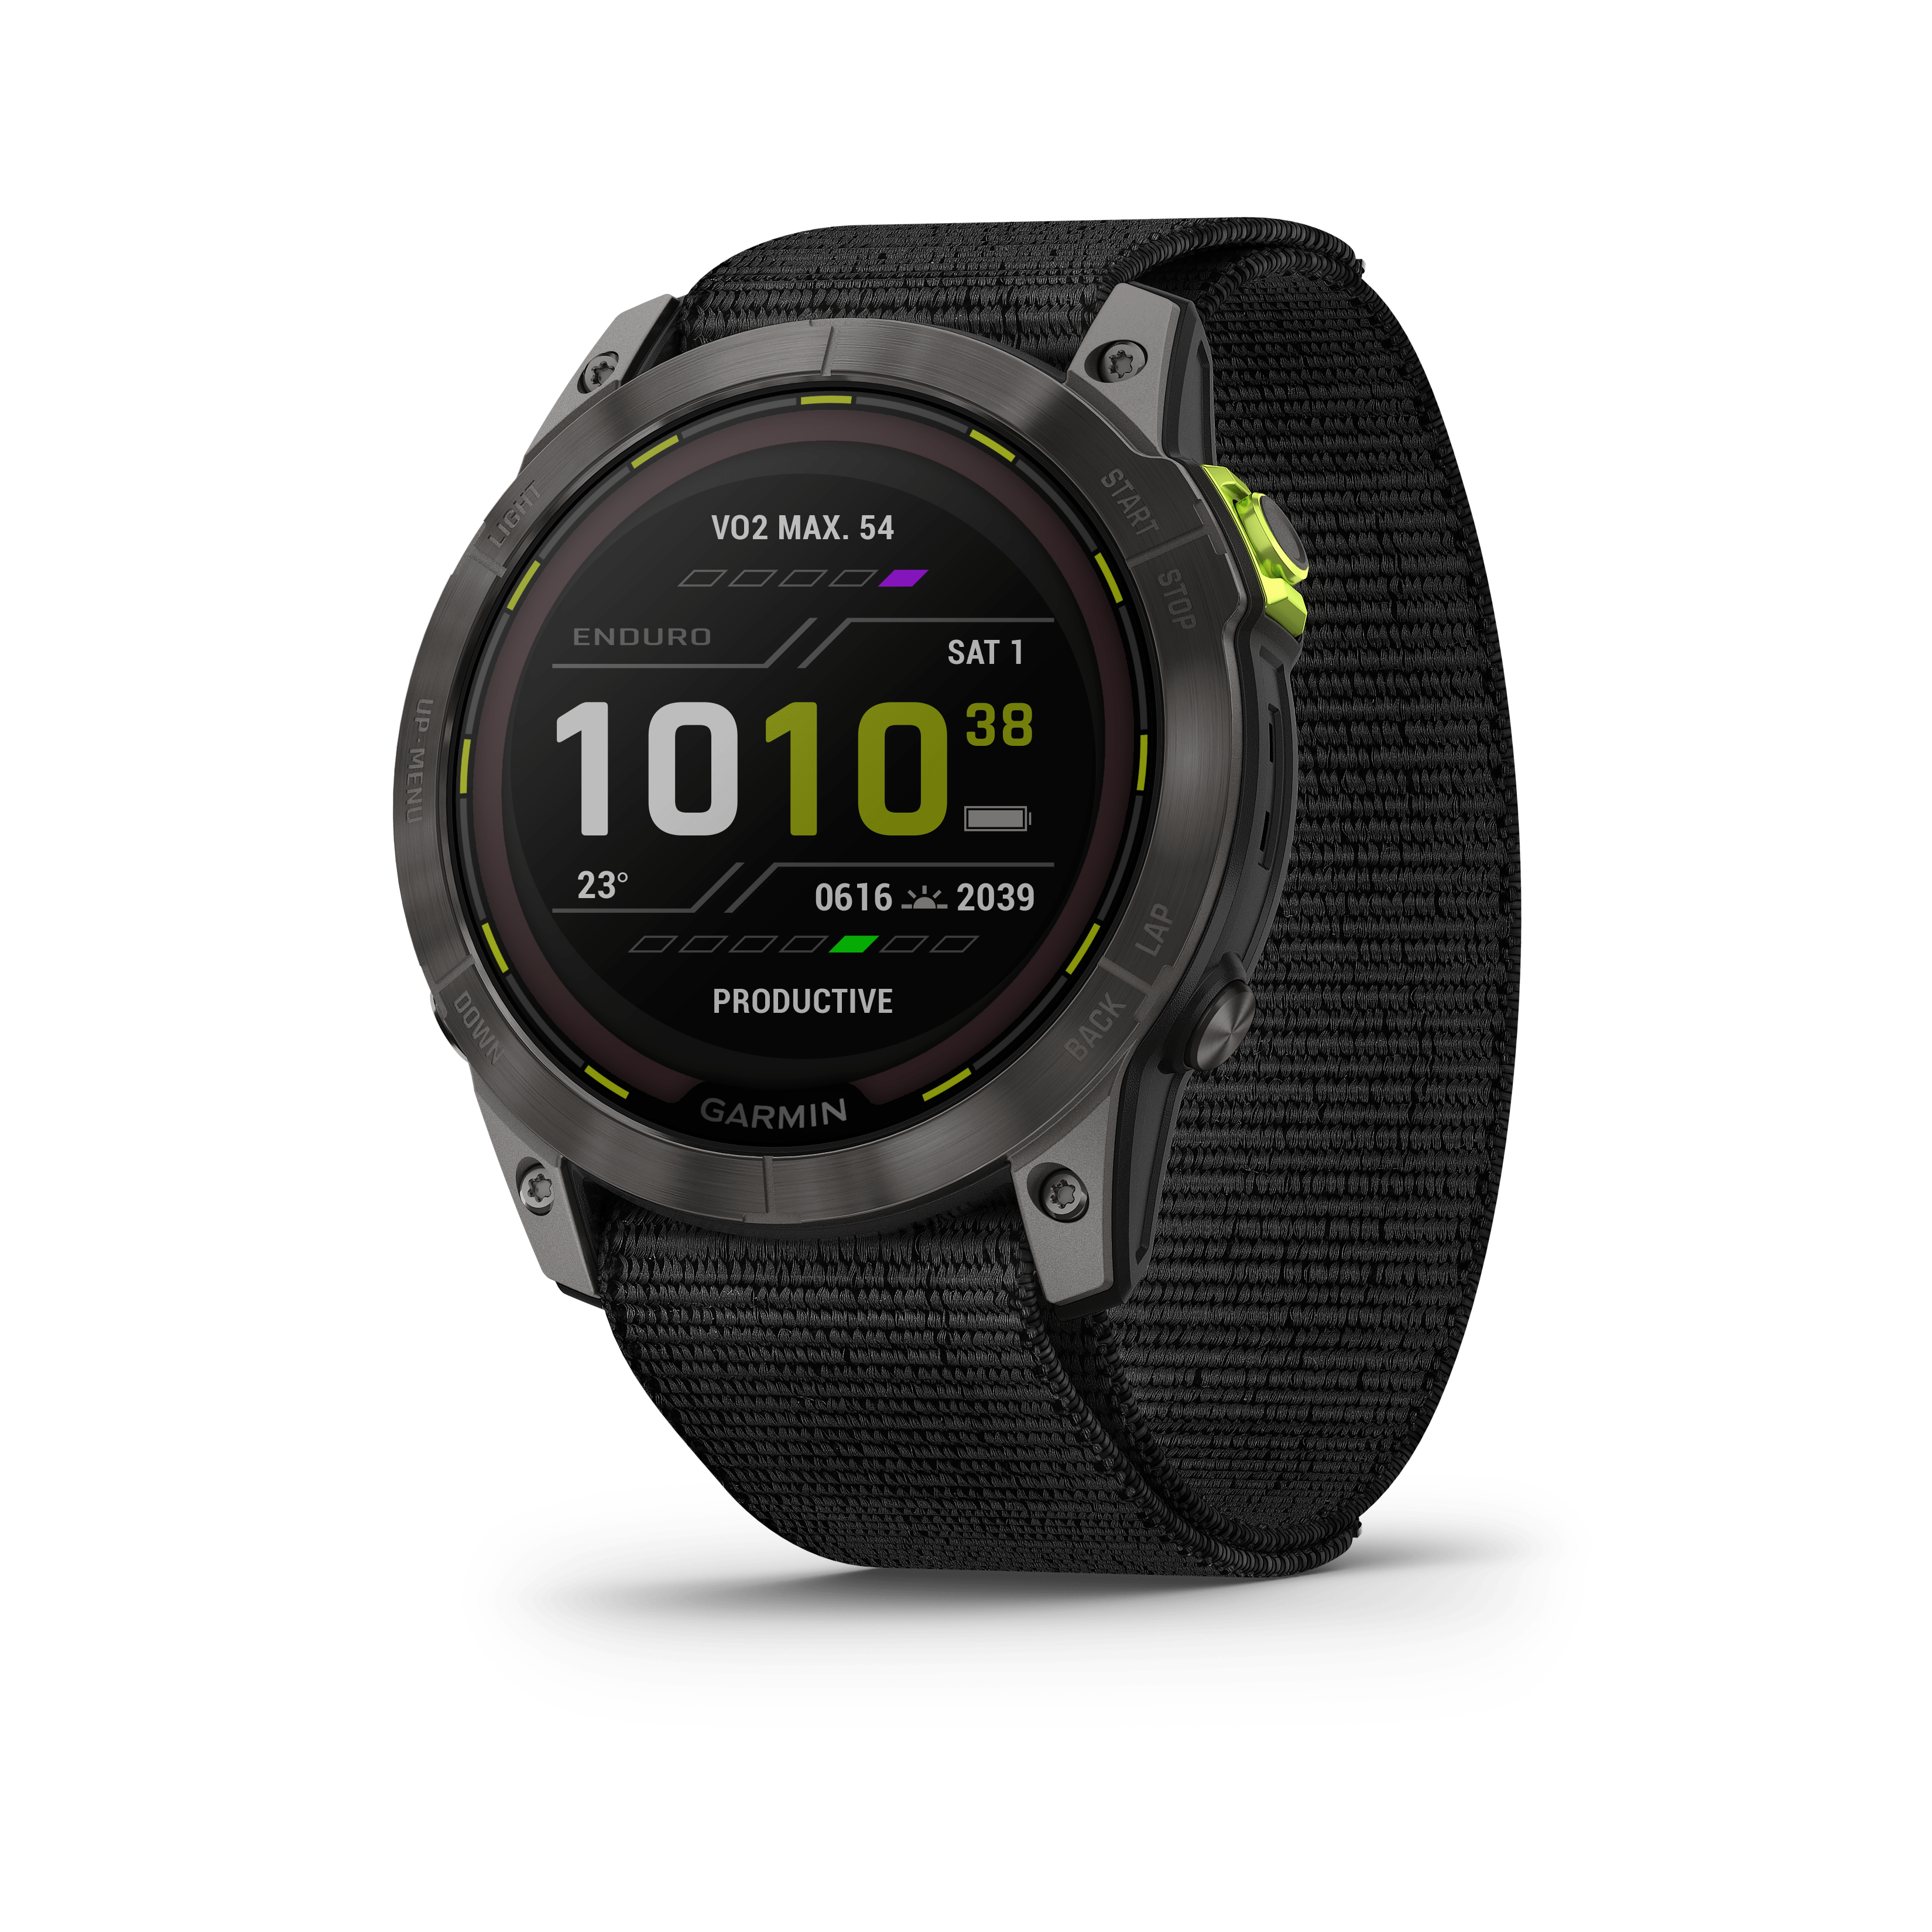 GARMIN ENDURO 2: The watch with 150 hours of battery life